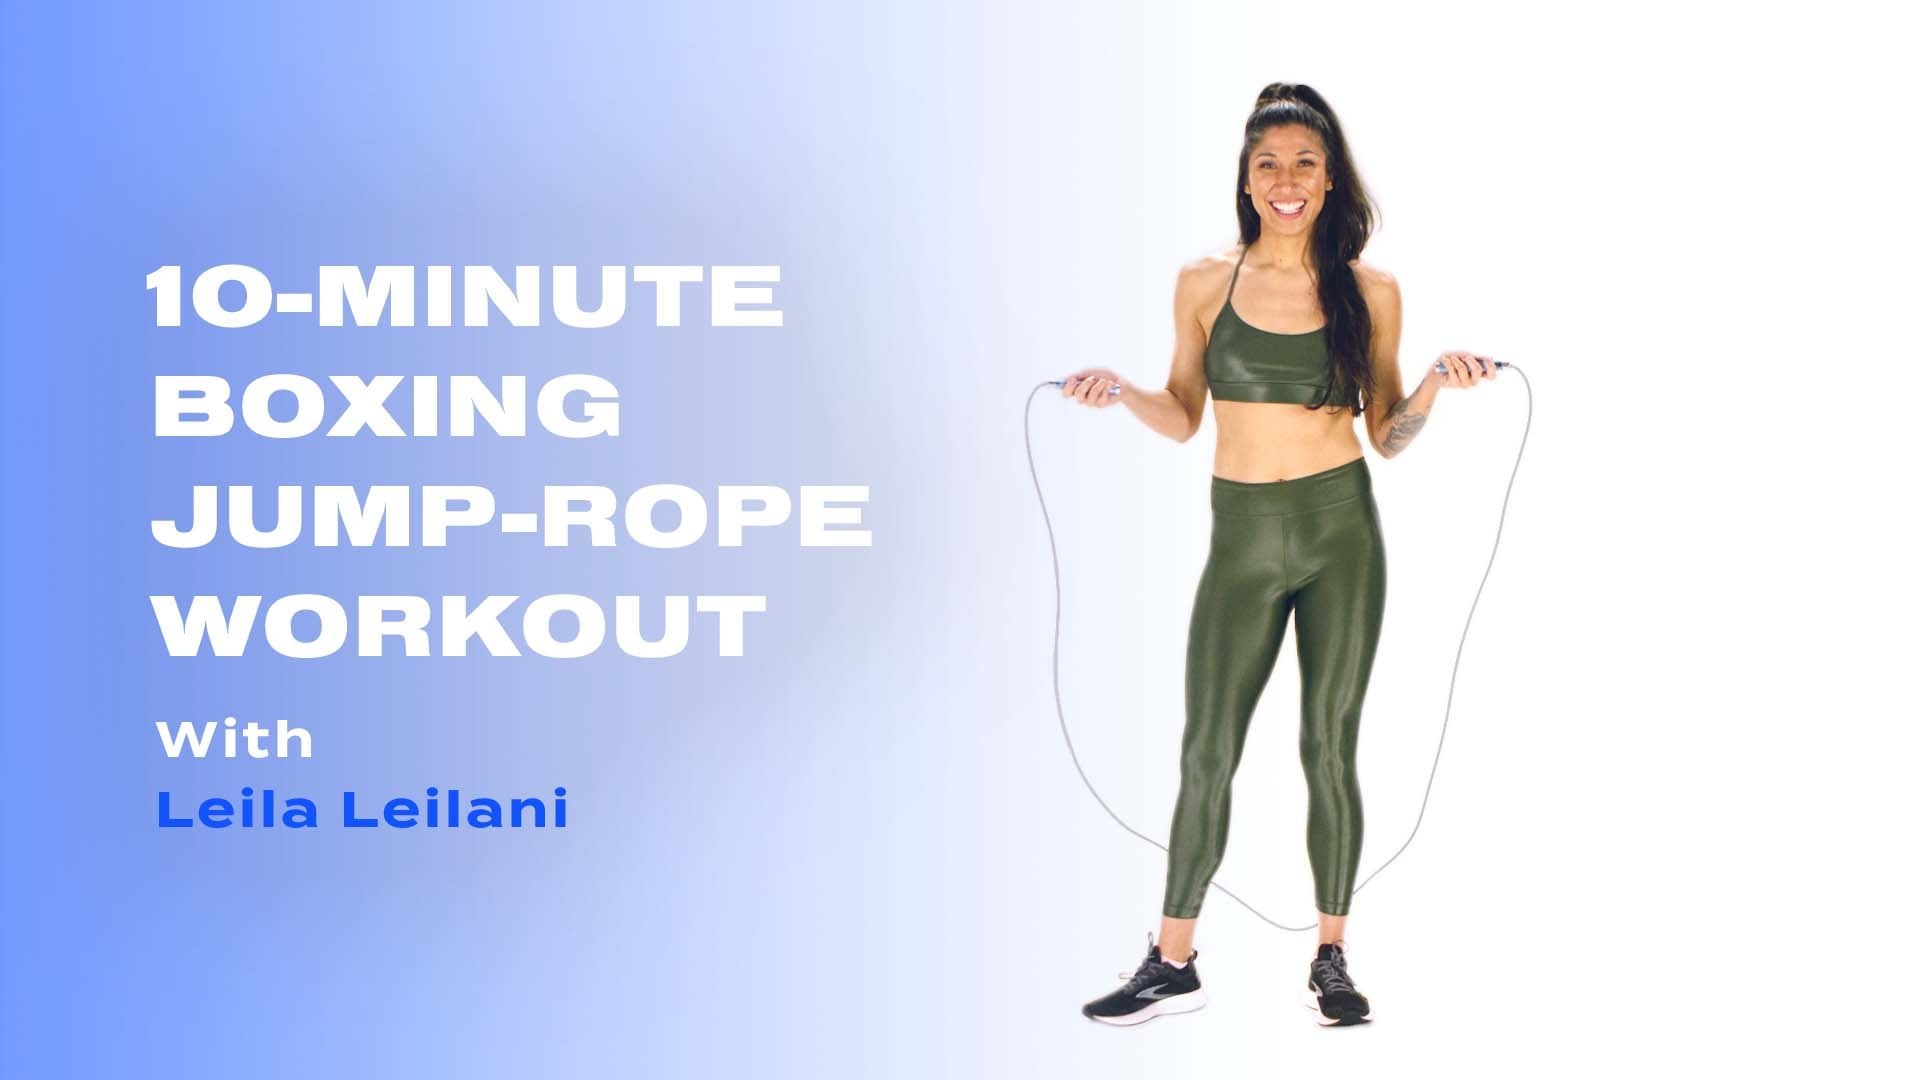 10-Minute Boxing Jump-Rope Workout With Leila Leilani - video